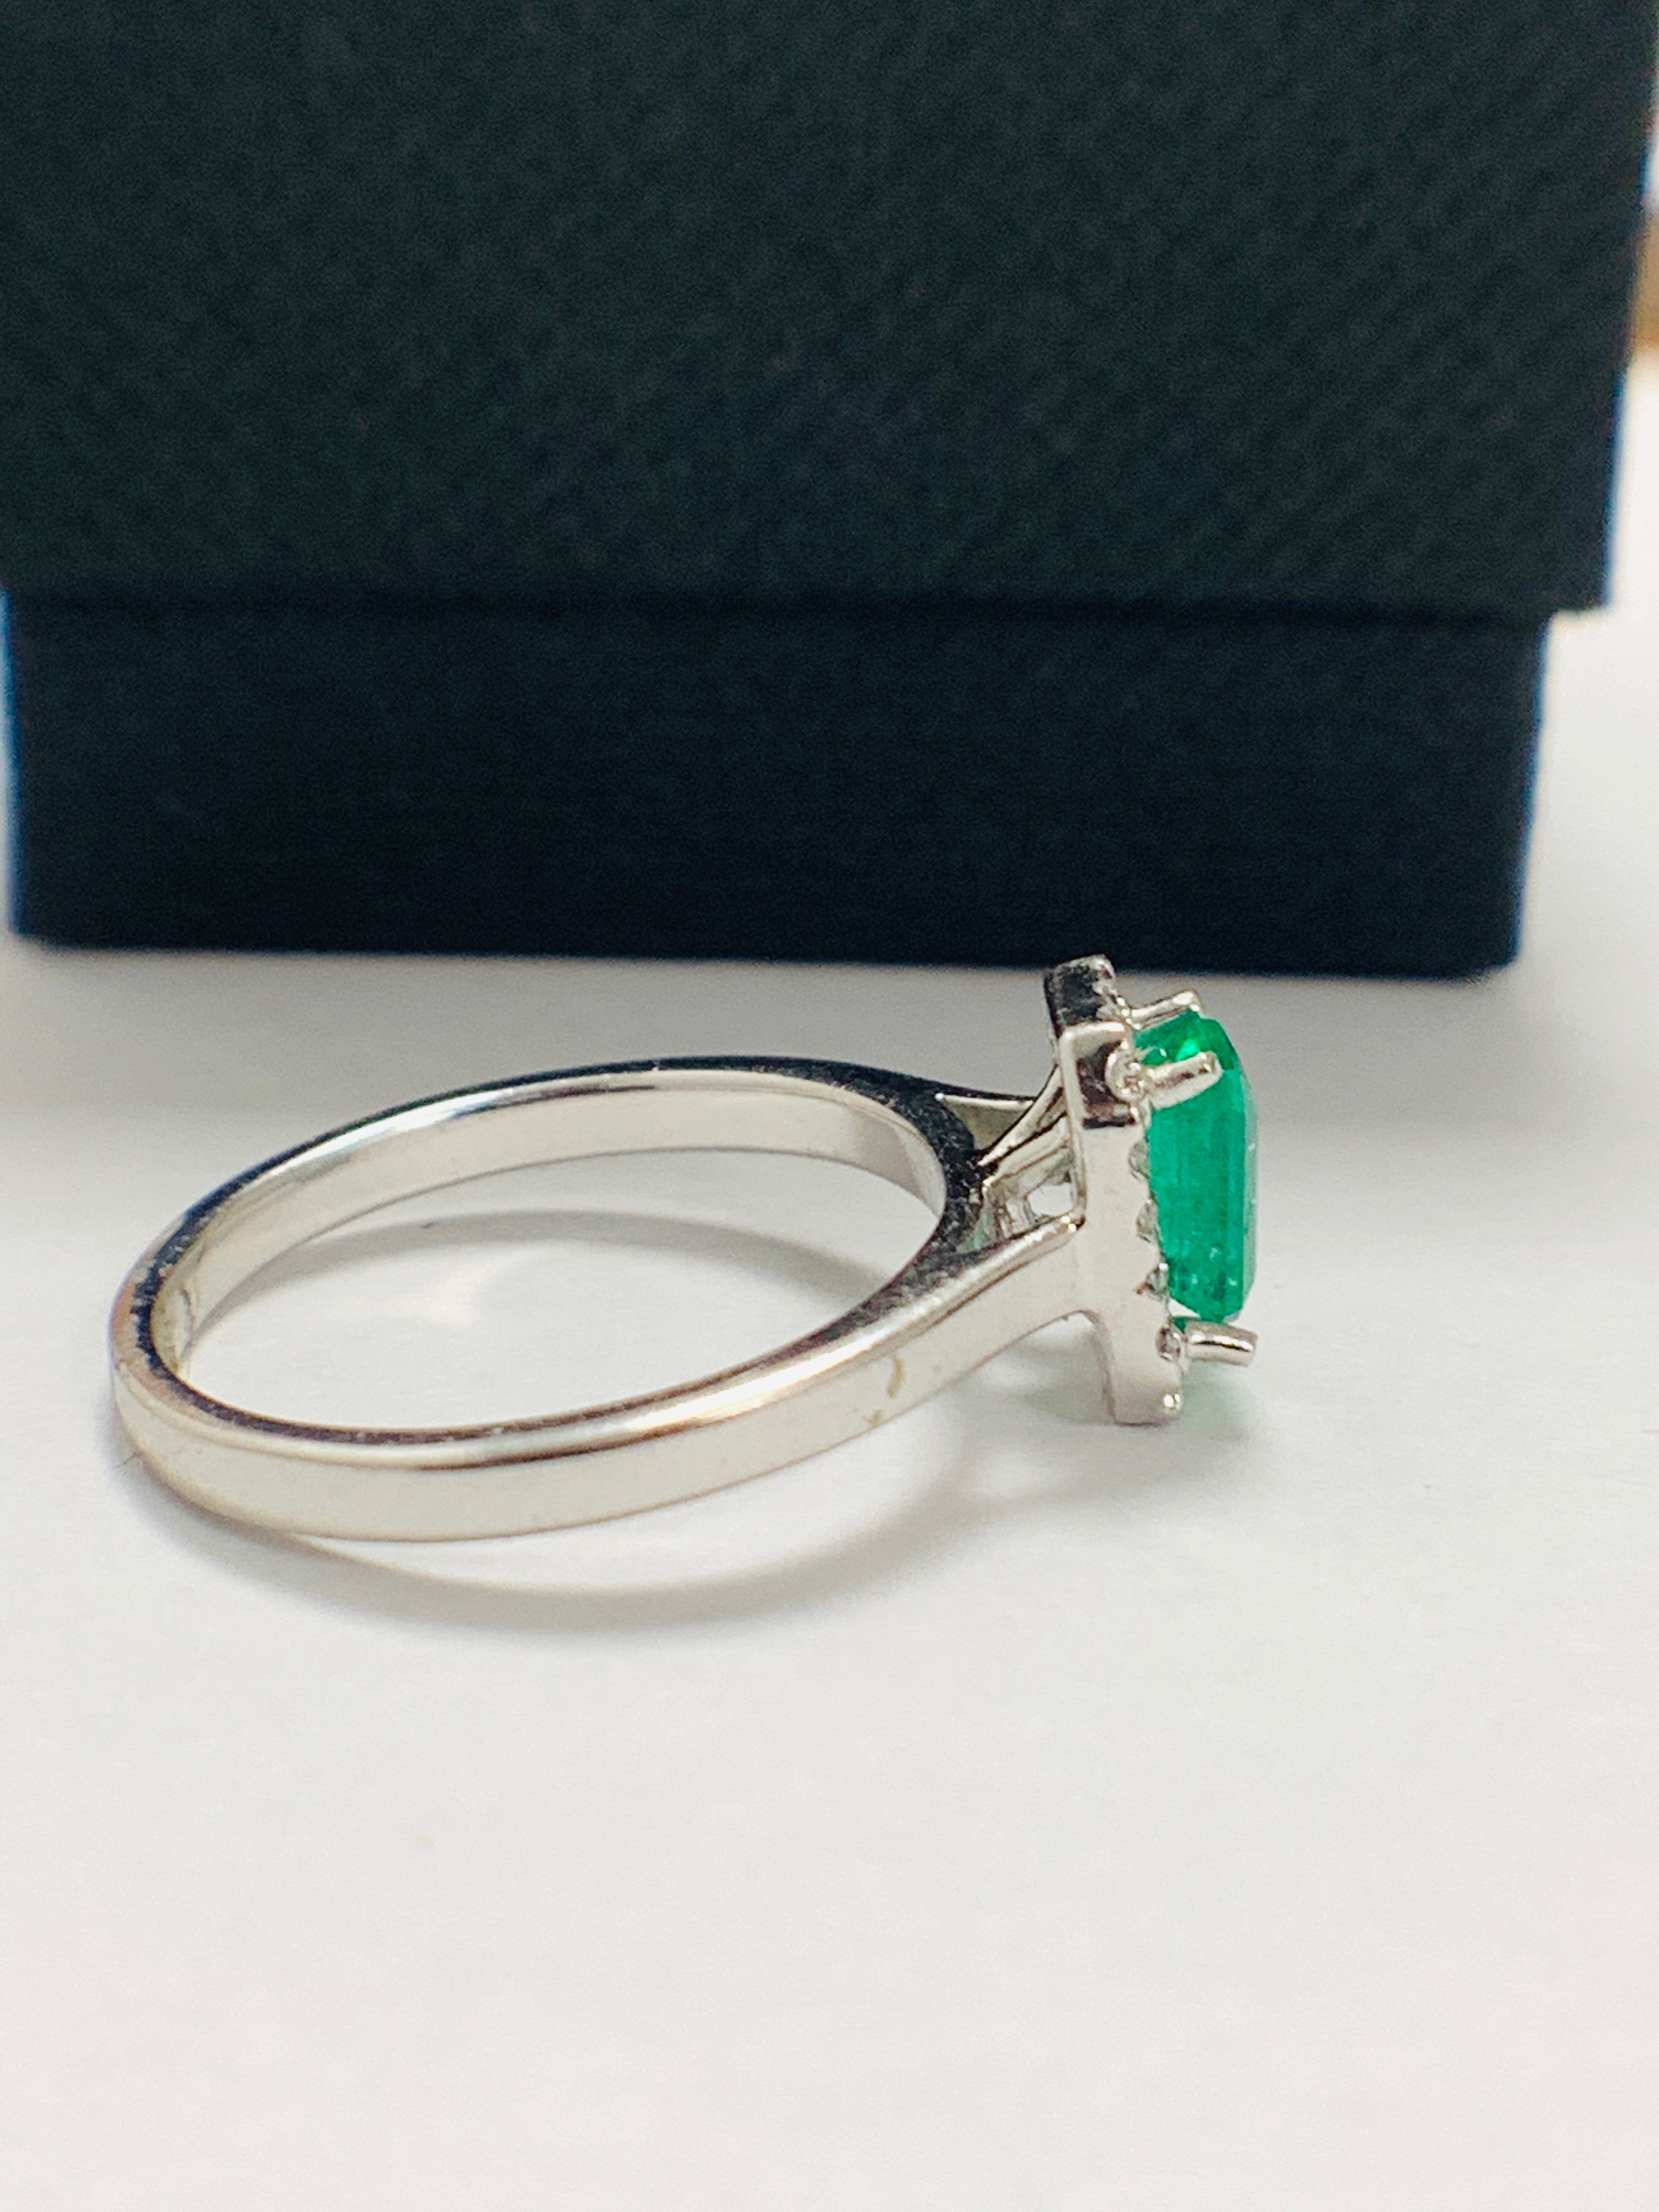 Emerald And Diamond Ring. - Image 5 of 8